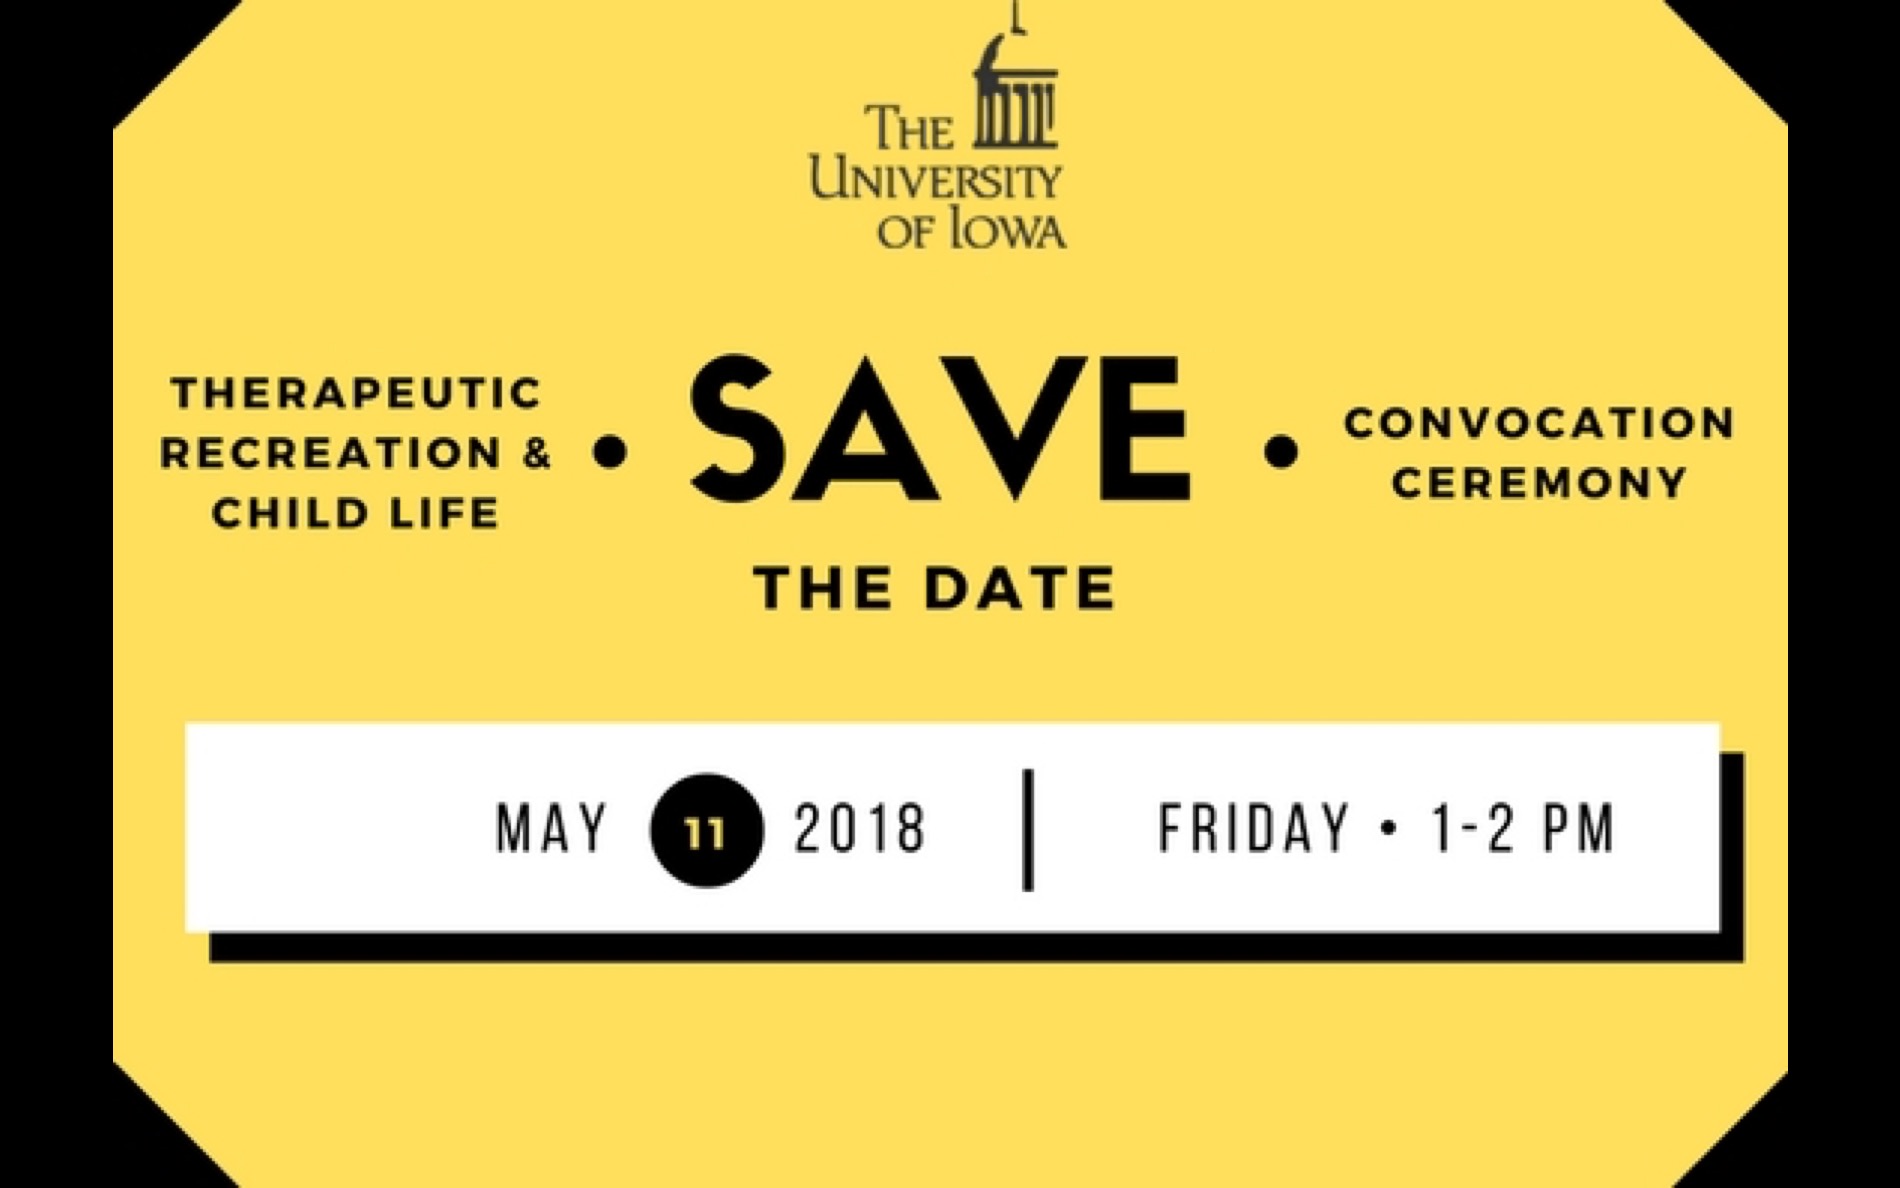 Save the Date - Therapeutic Recreation & Child Life Convocation Ceremony - Friday, May 11, 2018 from 1-2p at the IMU